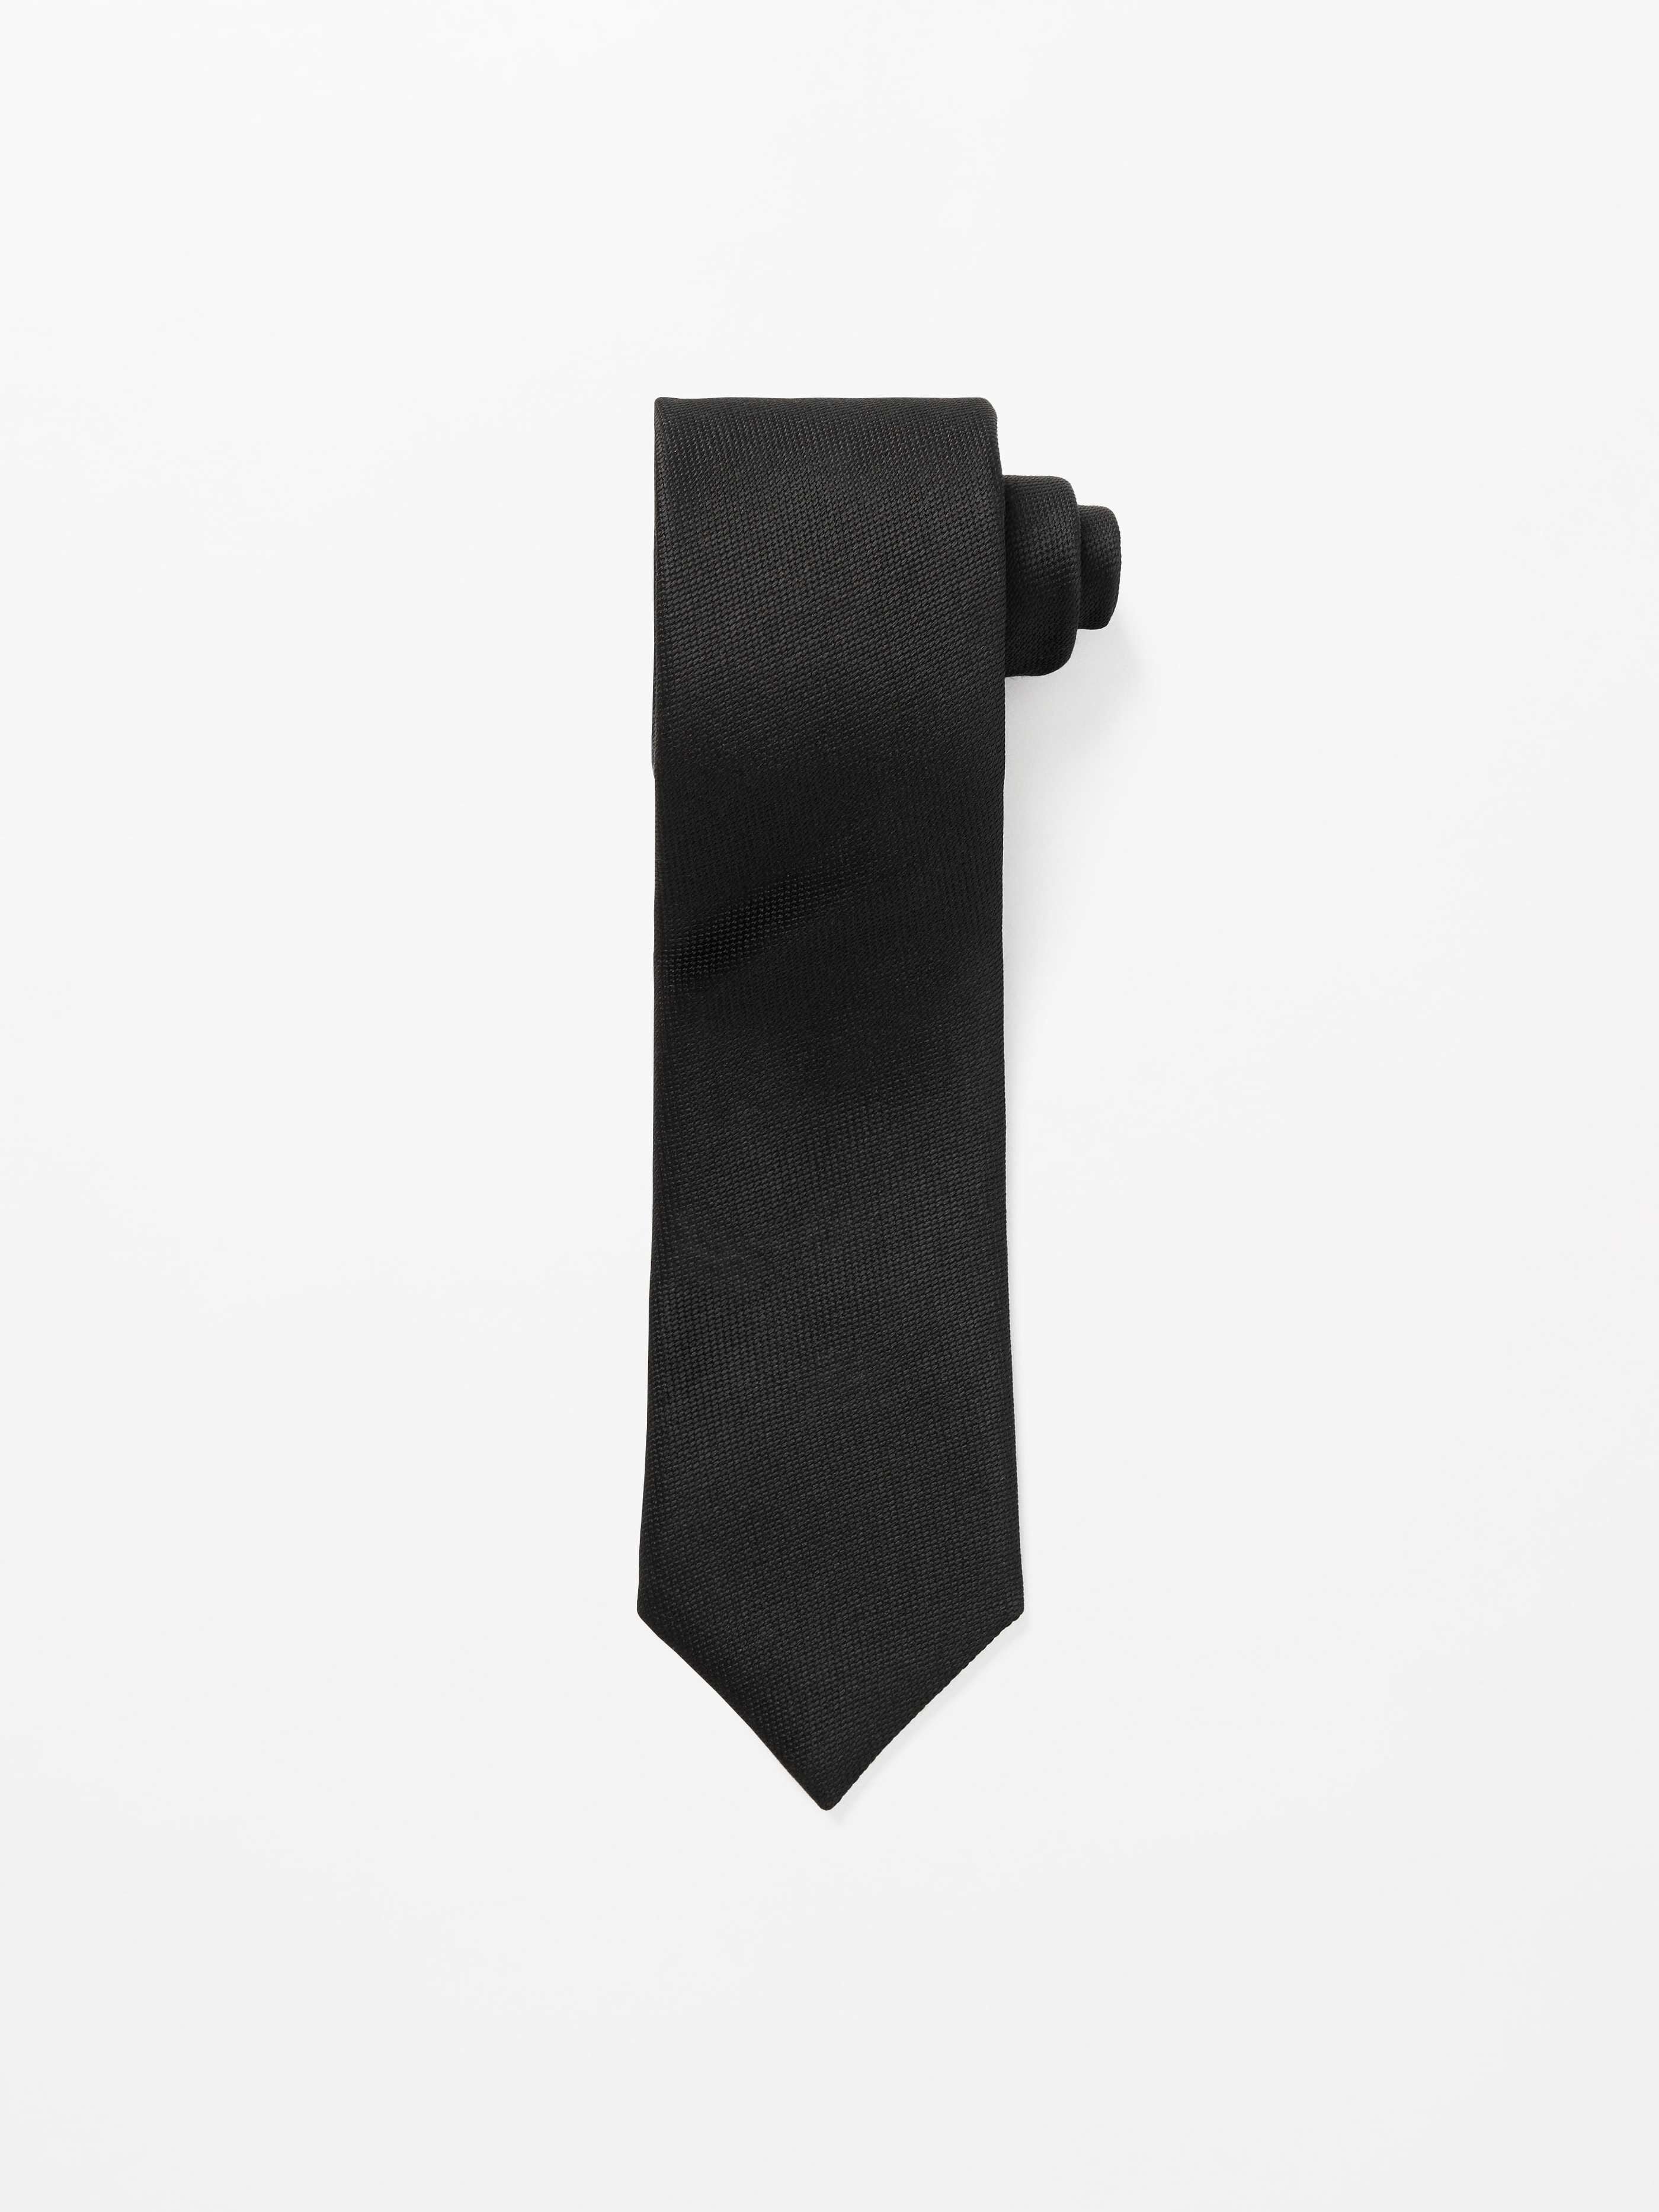 Tiger Of Sweden Tido Tie in Black U67800004Z  | Shop from eightywingold an official brand partner for Tiger Of Sweden in Canada and US.